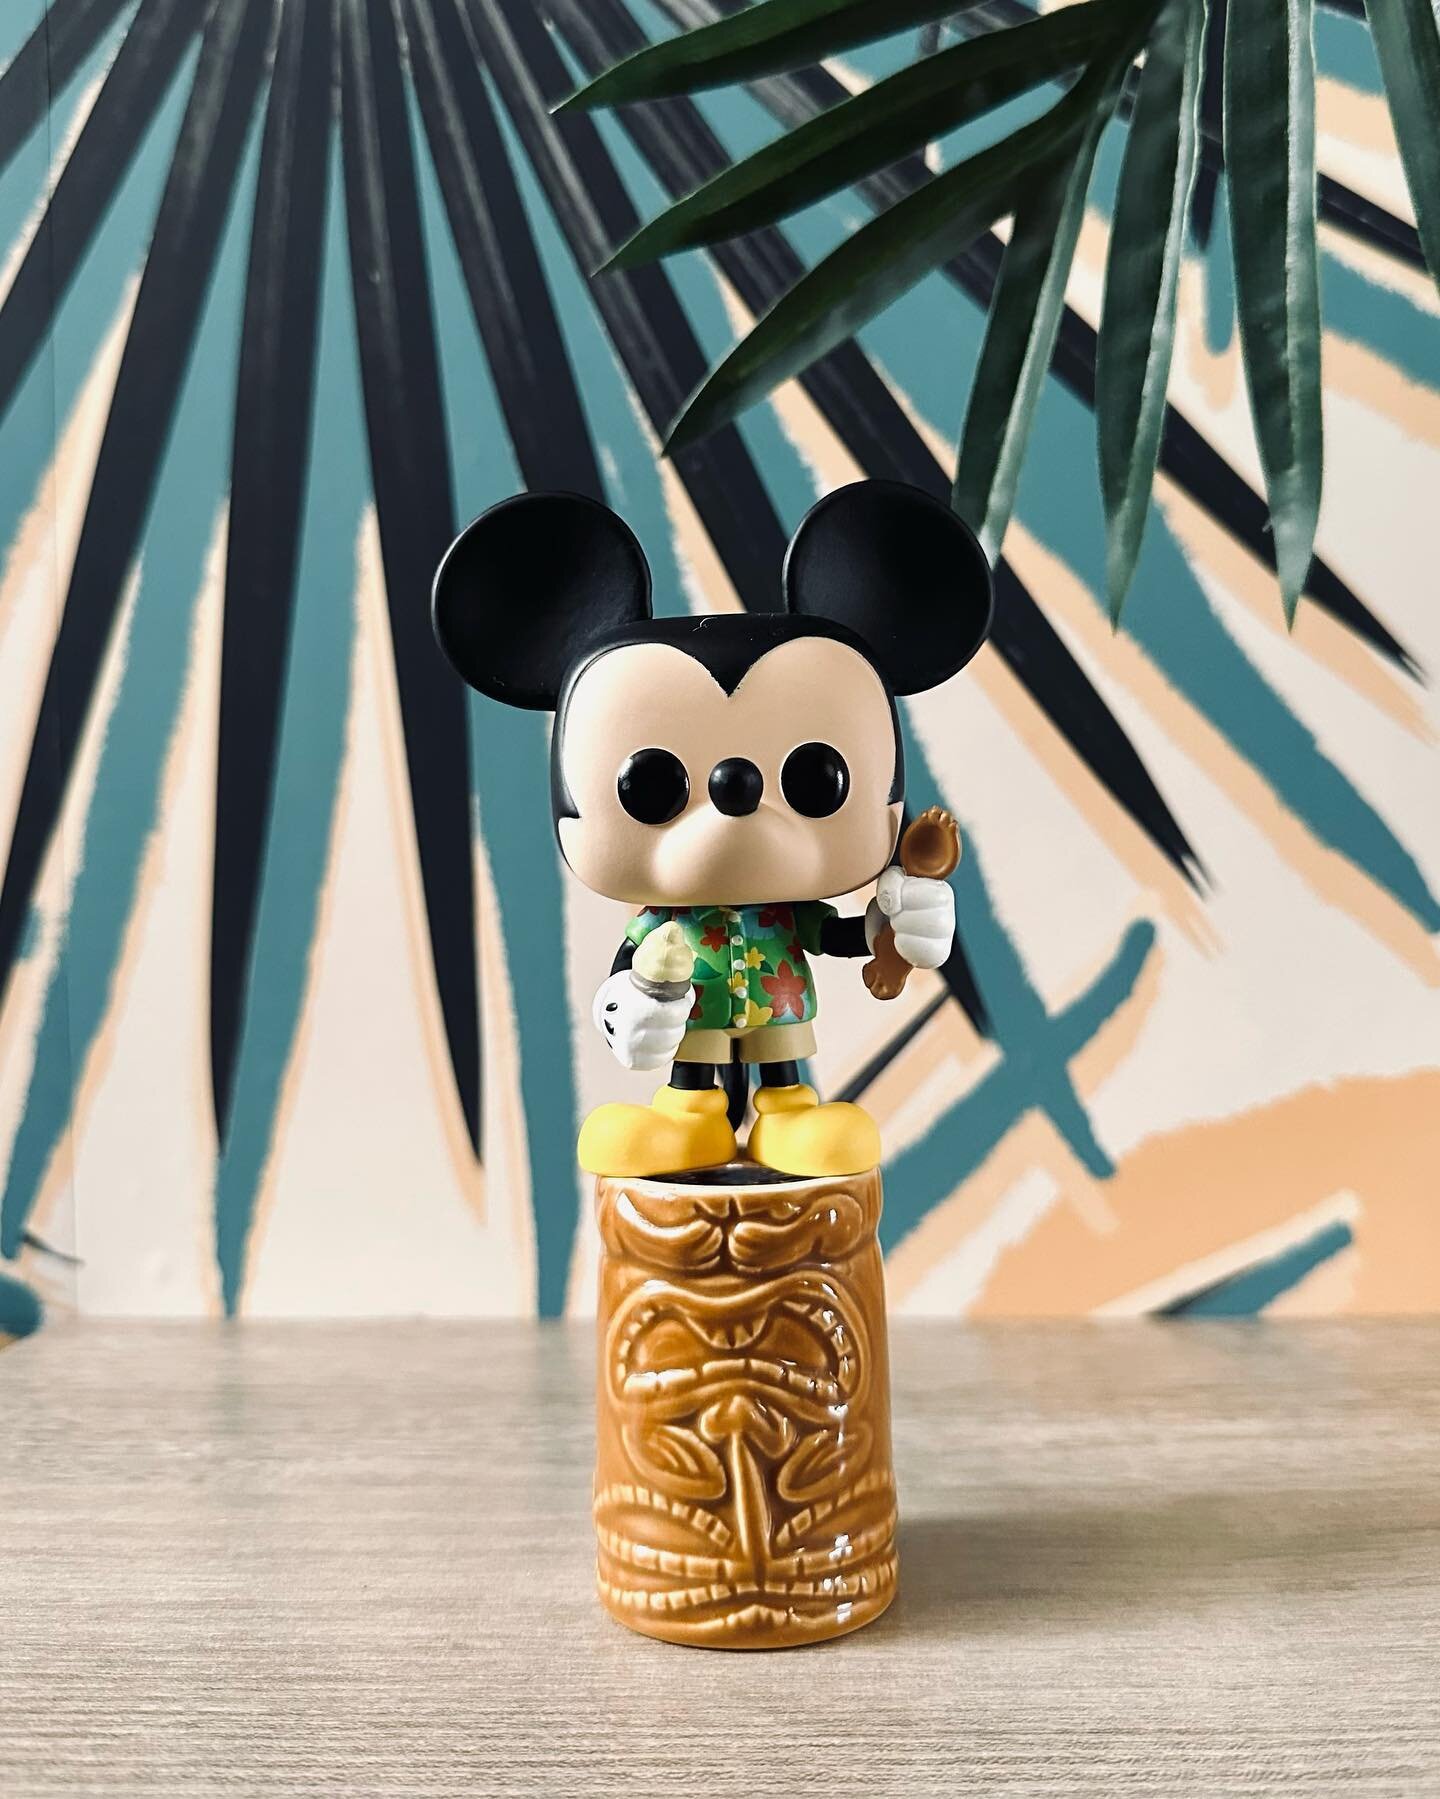 If you know us, you know we collect Funko POPs! Our newest addition: Mickey with Dole Whip! Who else would eat Dole Whip even during cold weather? 🙋🏻&zwj;♂️🙋🏾&zwj;♂️🍍🍦 #TikiTings #Funko